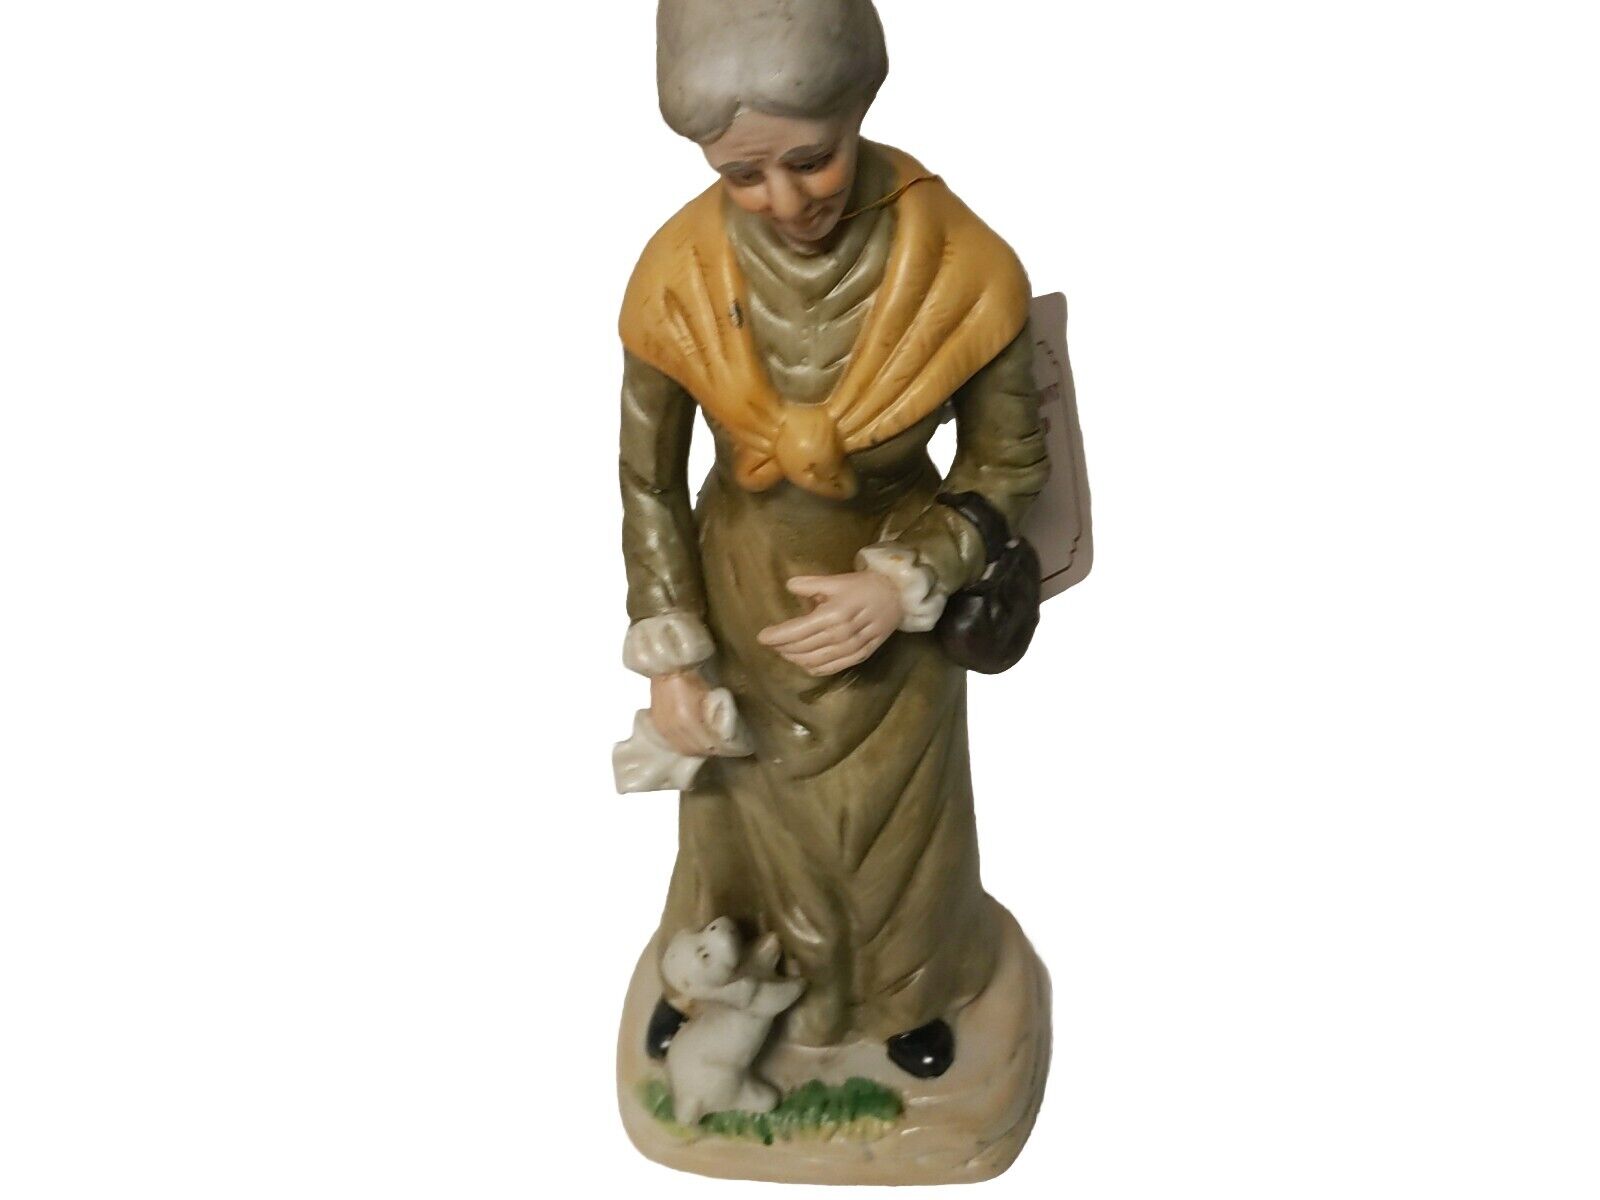 Graisa Mont Limited Figurine Old Woman With Dog and Holding Purse Made In Taiwan